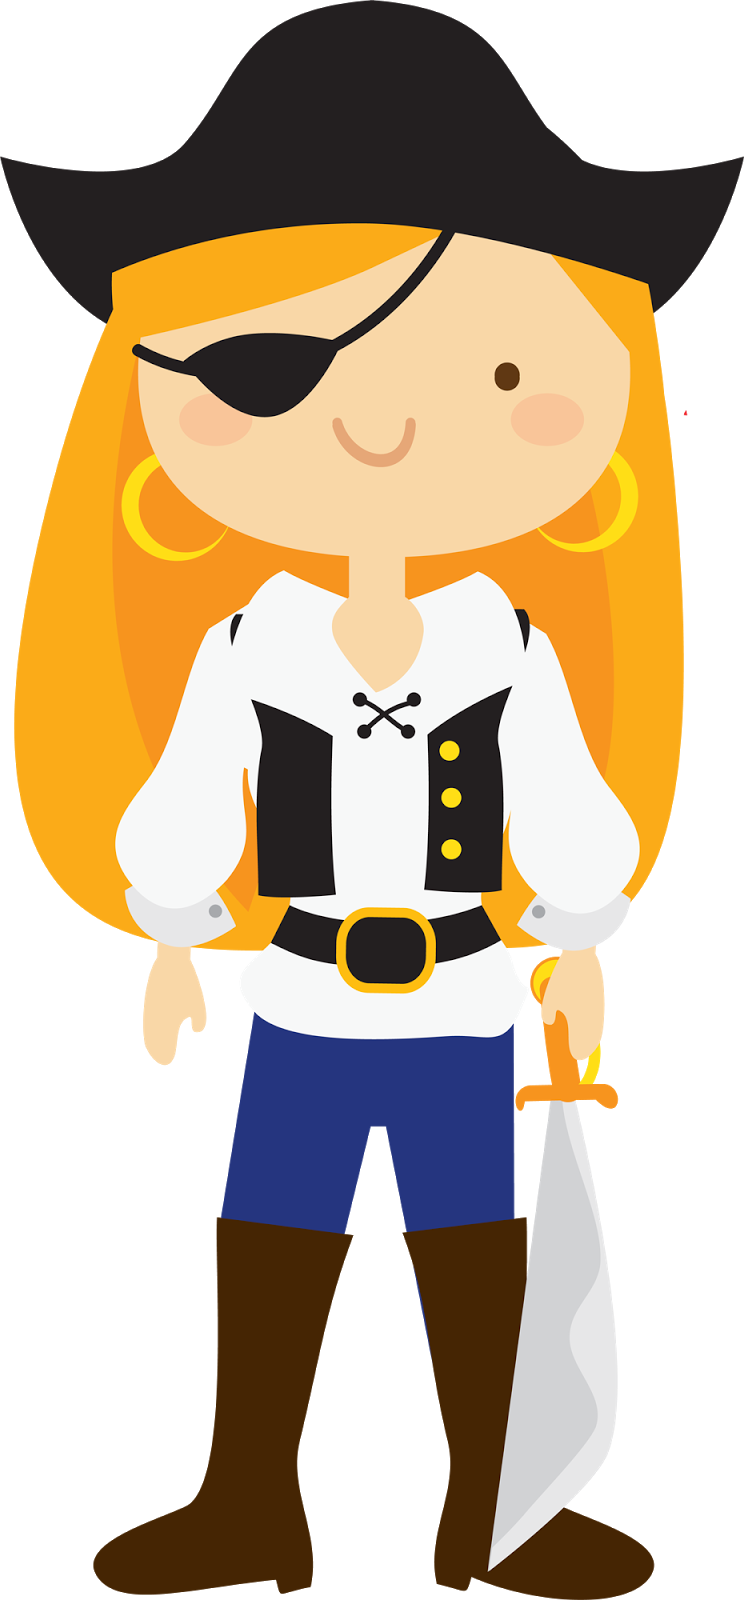 Queen teaching treasures back. Faces clipart pirate